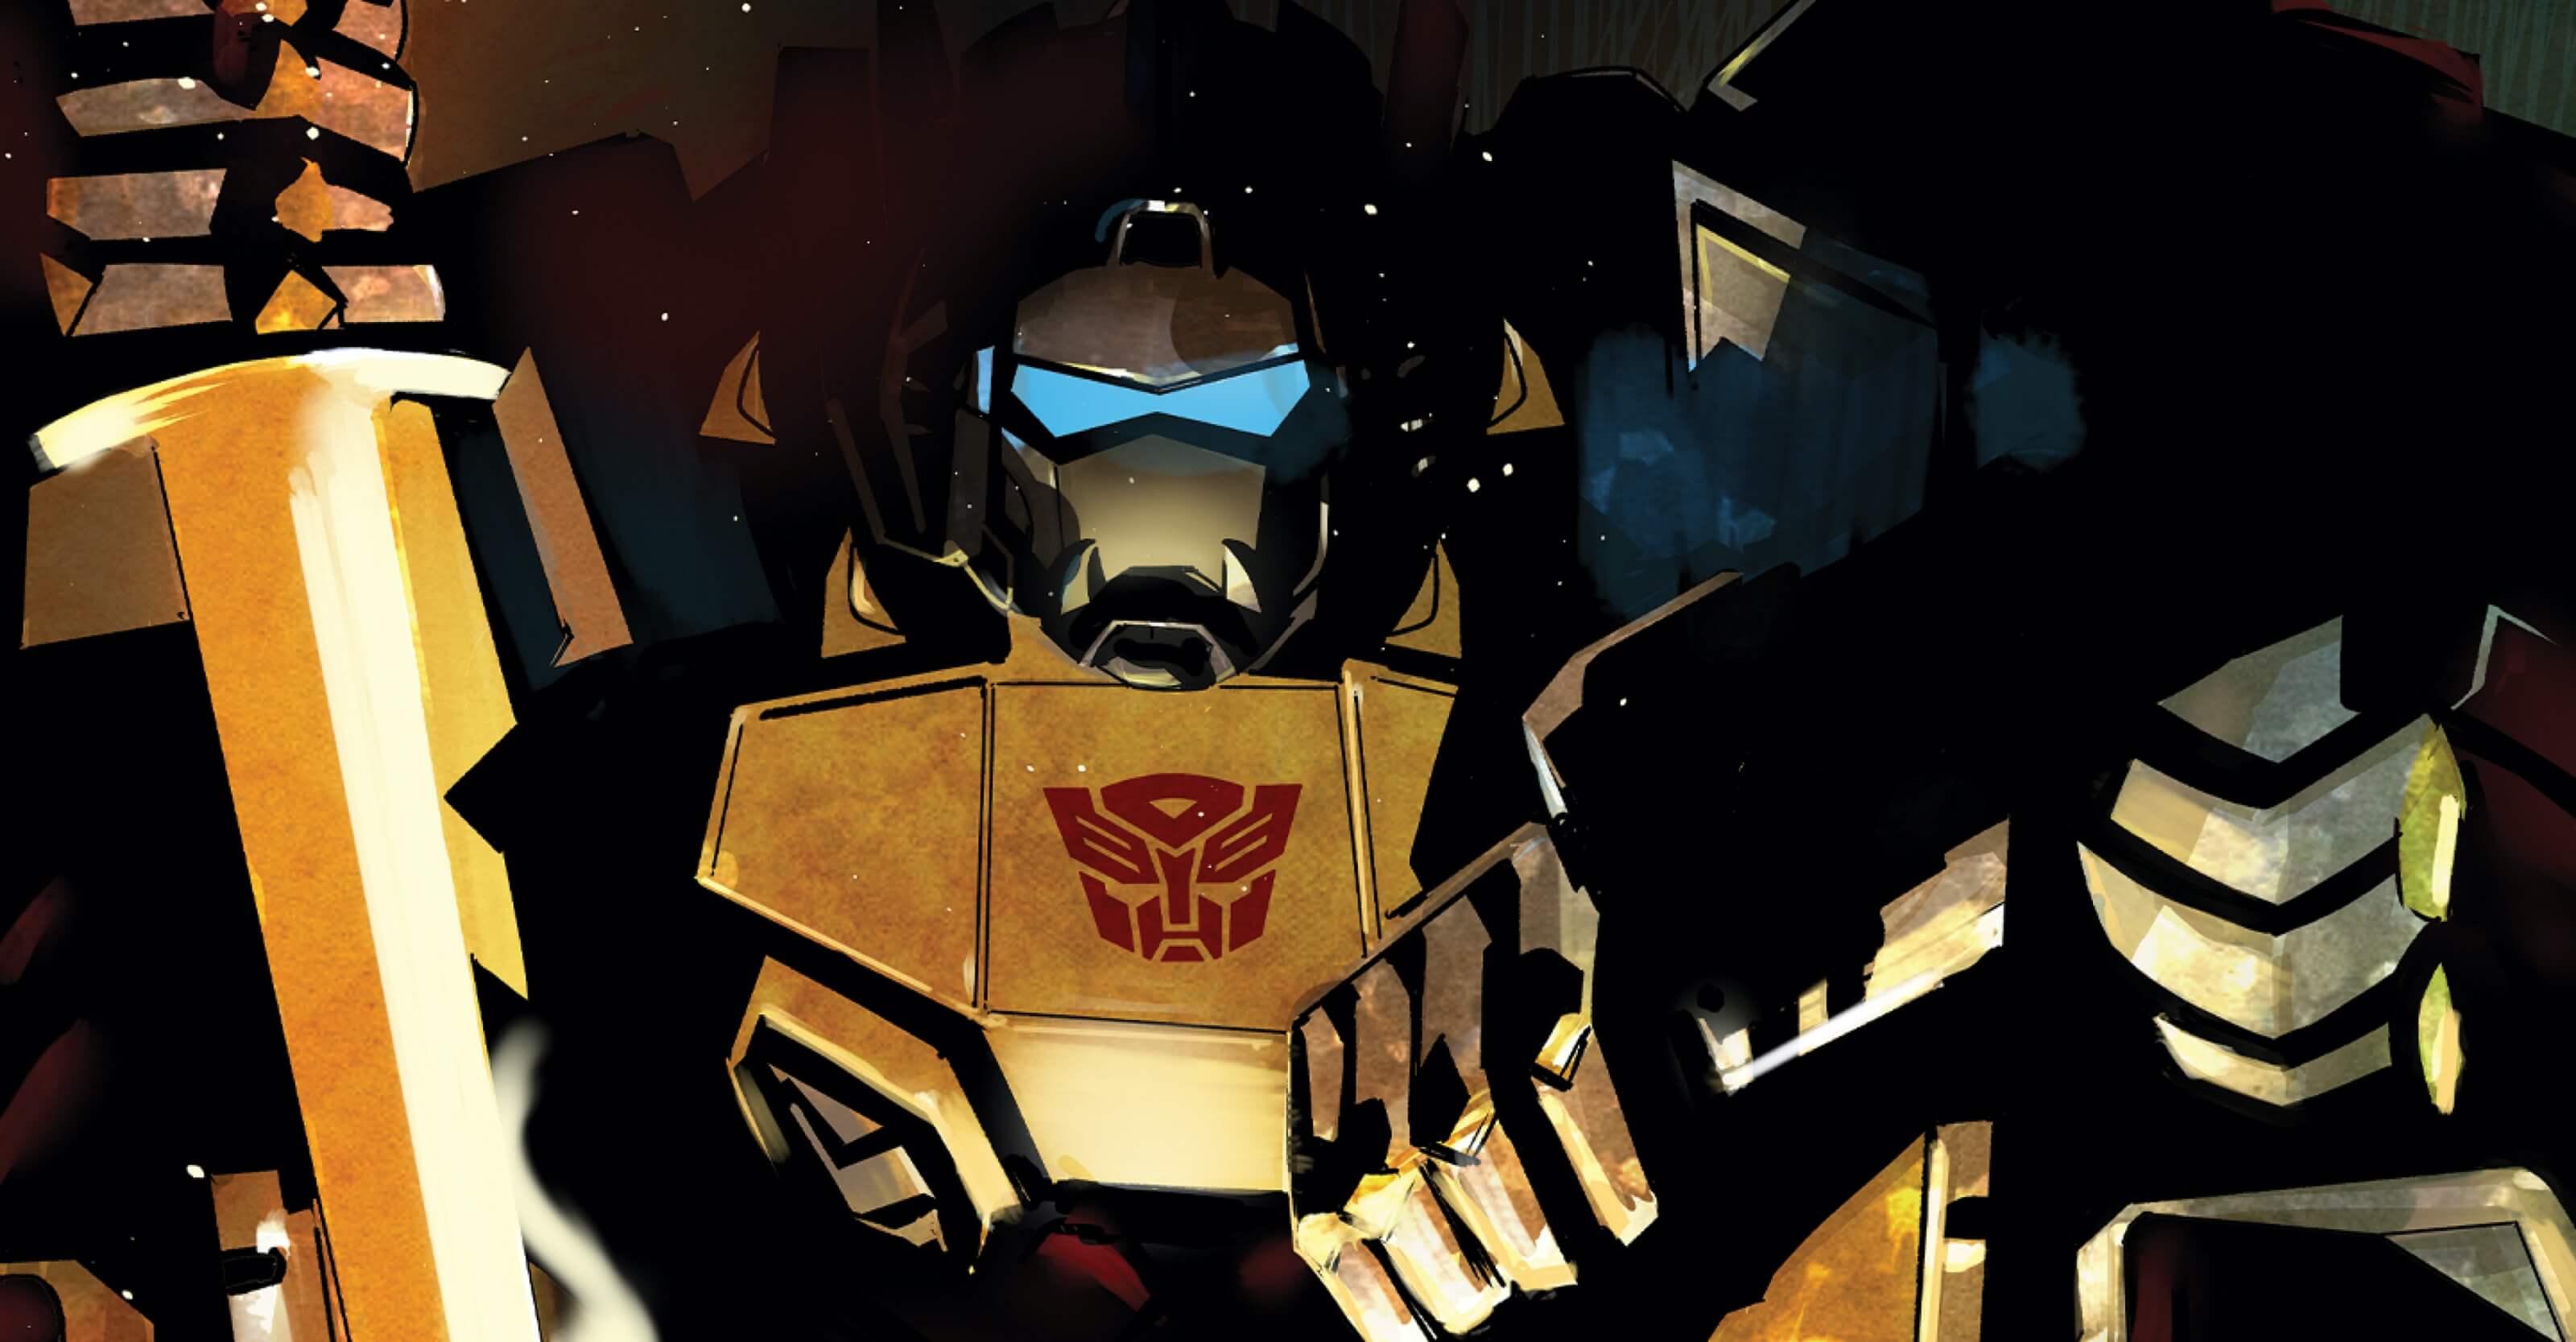 KING GRIMLOCK Reigns Supreme in August, Heralding a Huge Month for IDW’s TRANSFORMERS Comics